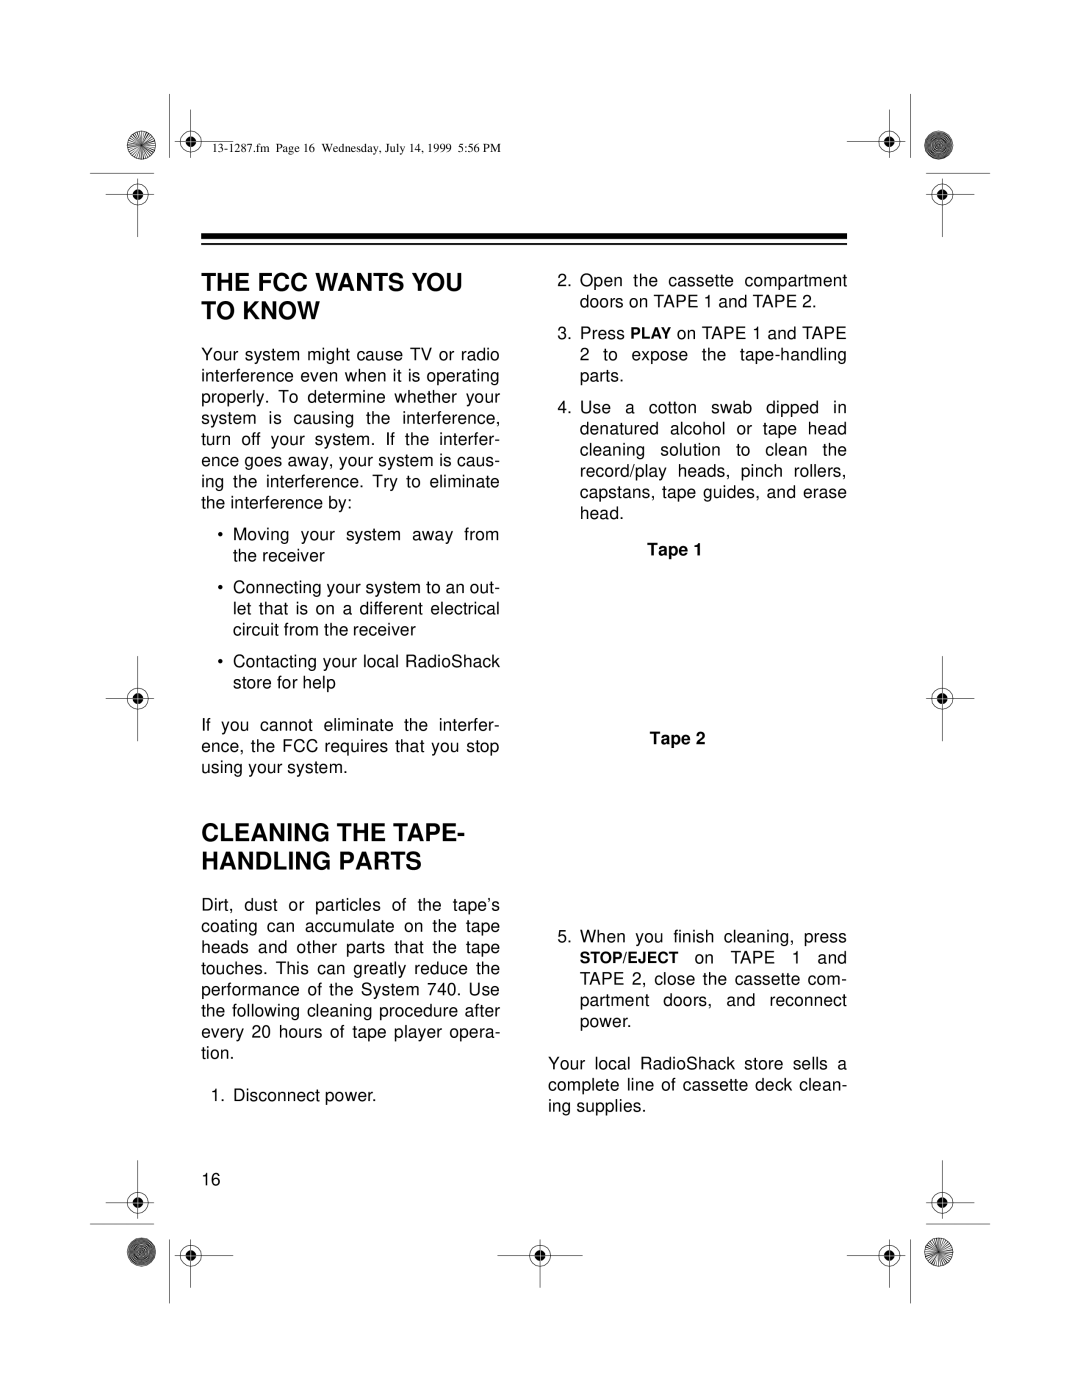 Optimus 740 owner manual The Fcc Wants You To Know, Cleaning The Tape- Handling Parts 